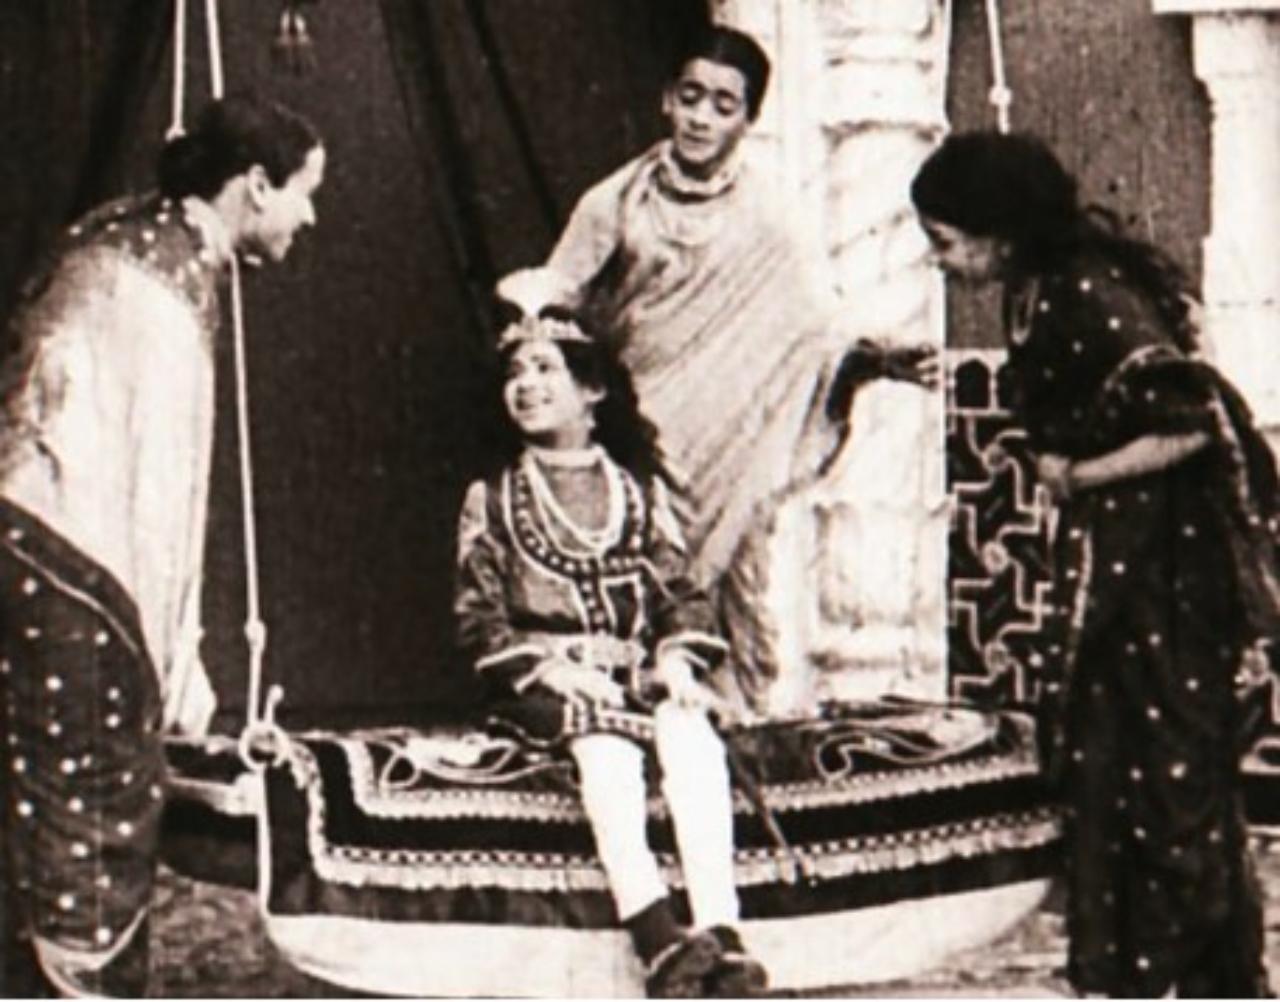 Raja Harishchandra is a 1913 Indian silent film directed and produced by Dadasaheb Phalke.